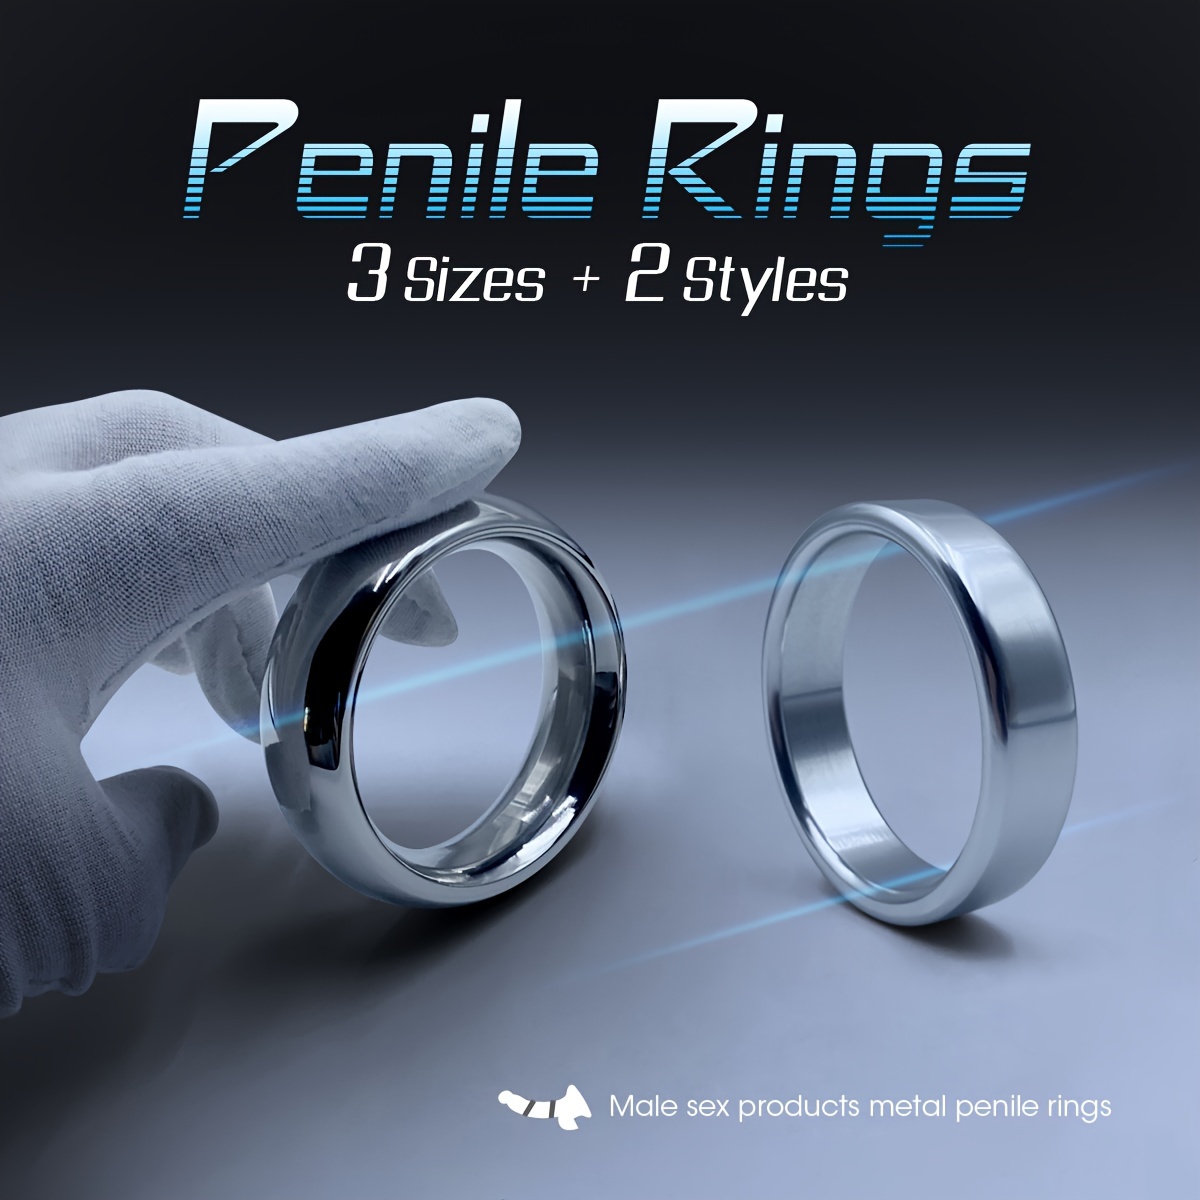 Metal Dildo Ring Weight Ball Exercise Testicle Stretcher Dildo Restraint  Lock Chastity Device Male Toys